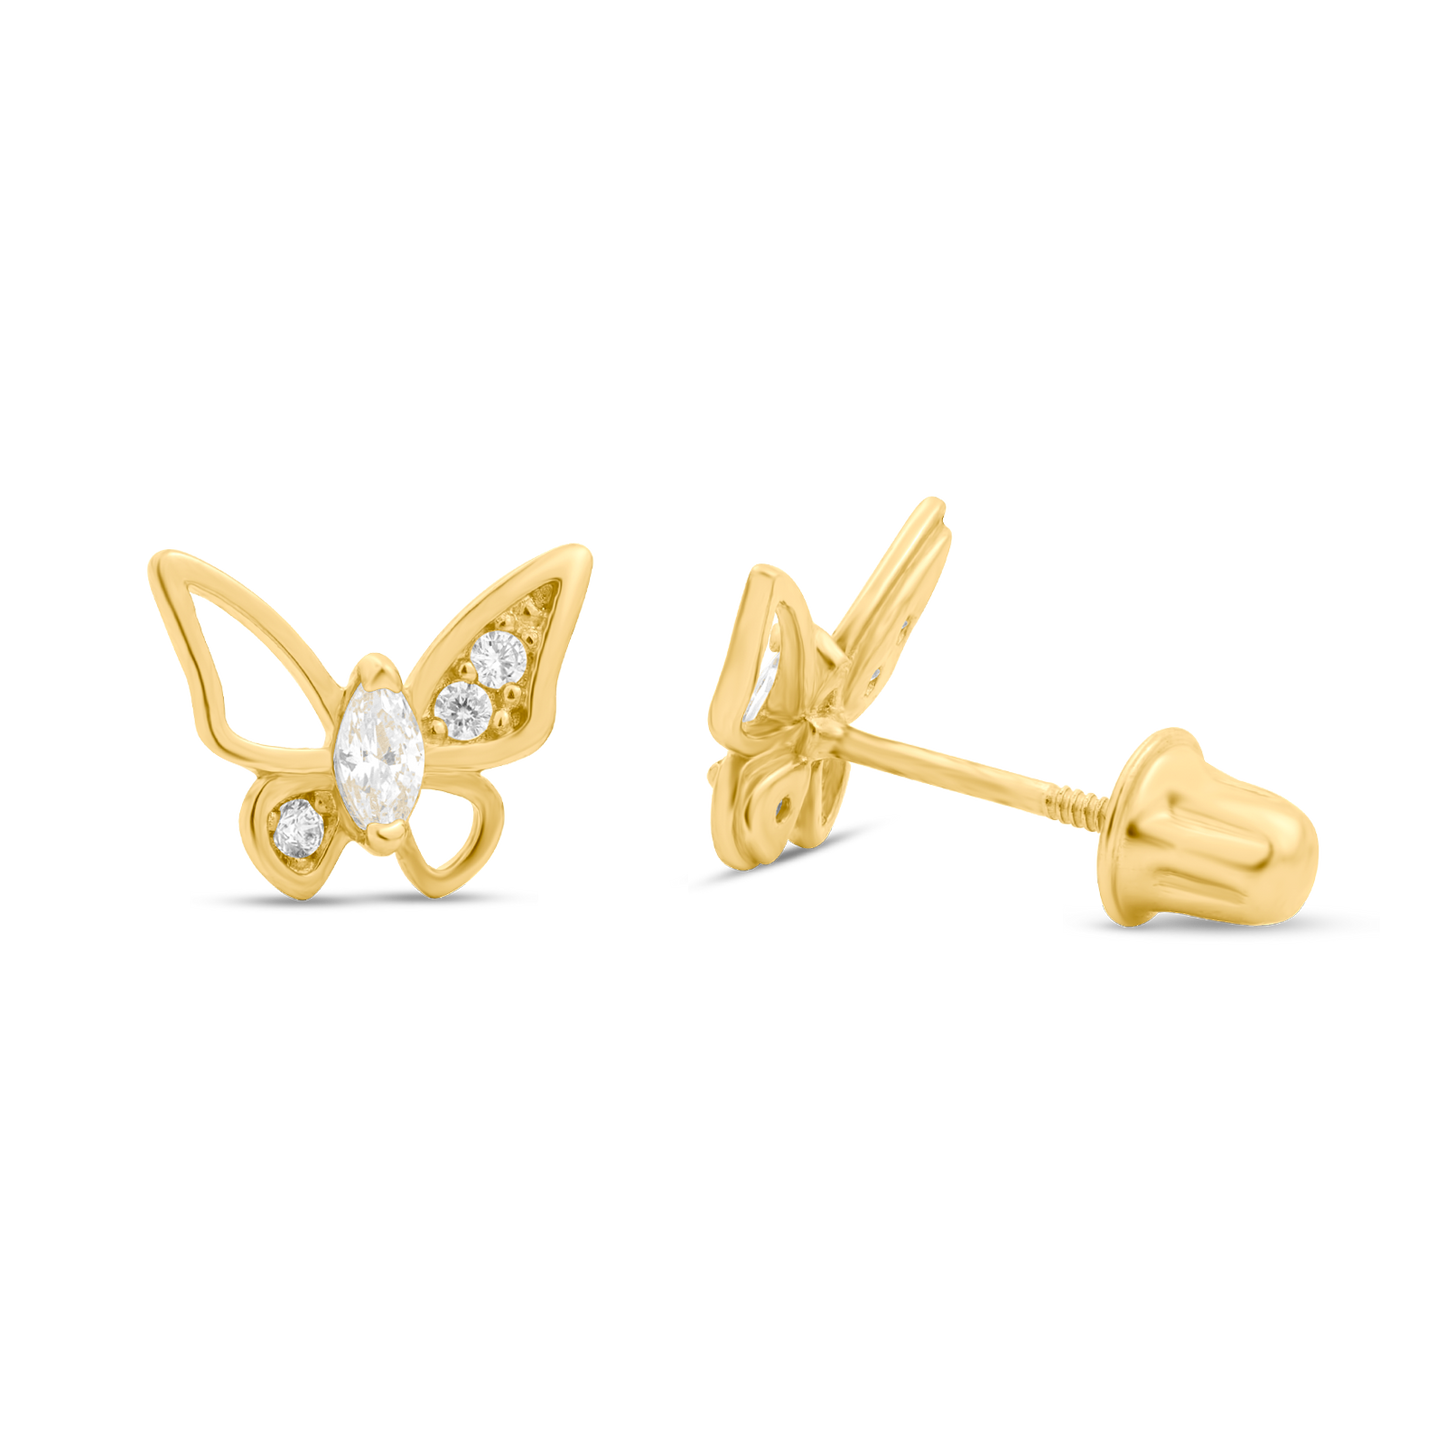 14K Yellow Gold Butterfly Earrings with CZs